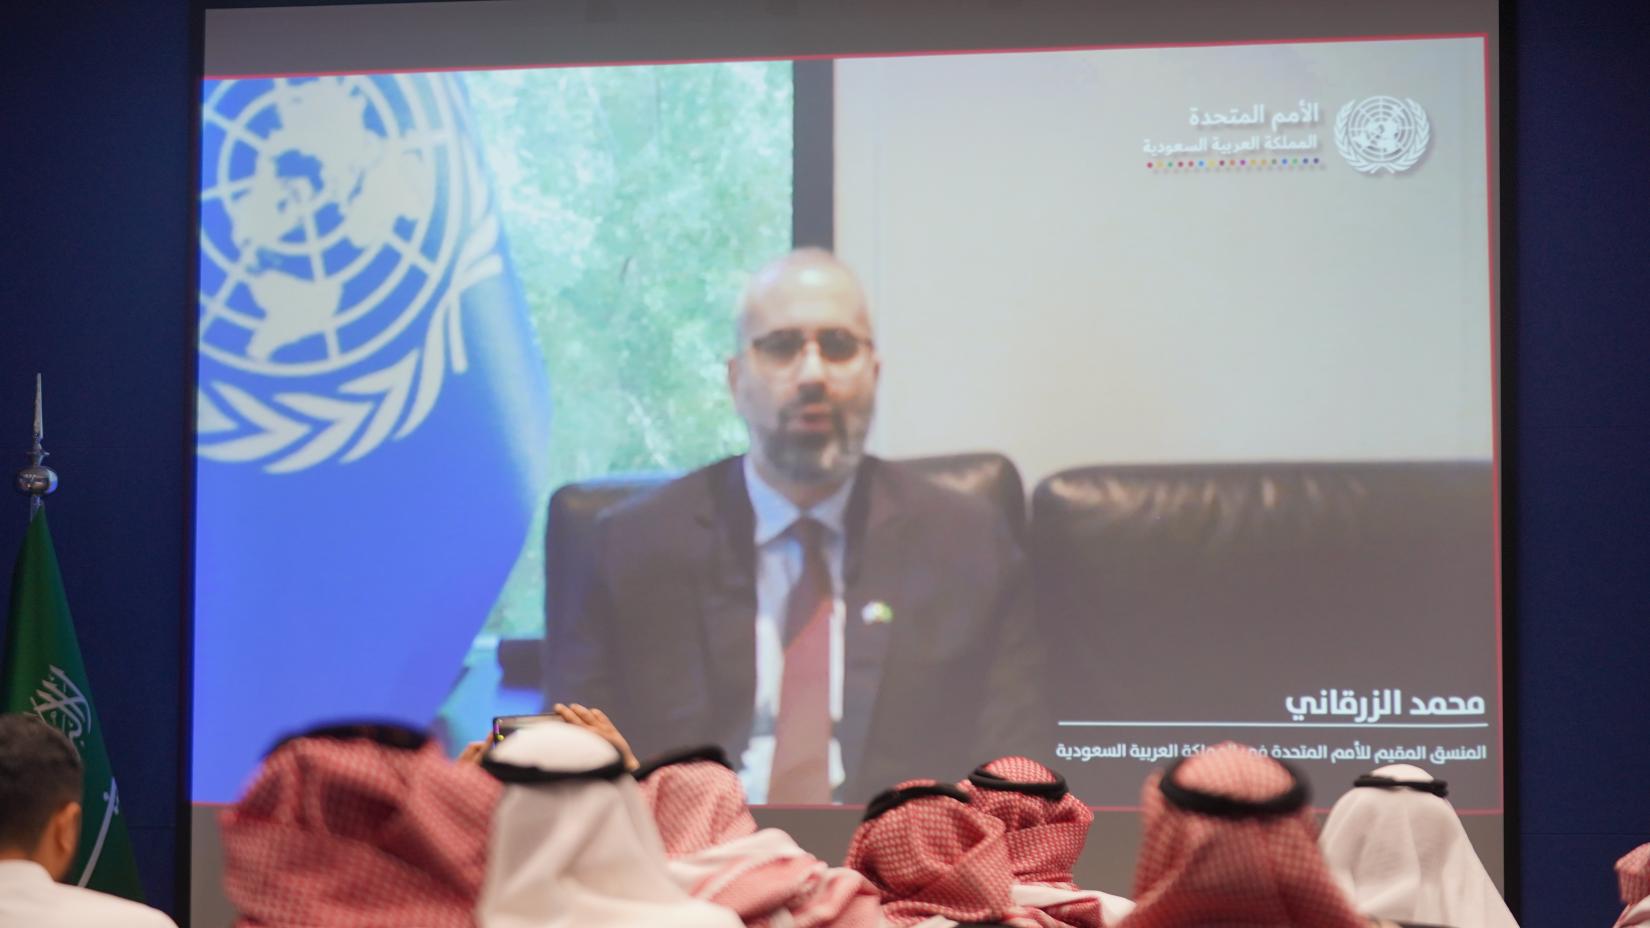 UN RC Mohamed El Zarkani during his virtual opening remarks at the UN Media workshop